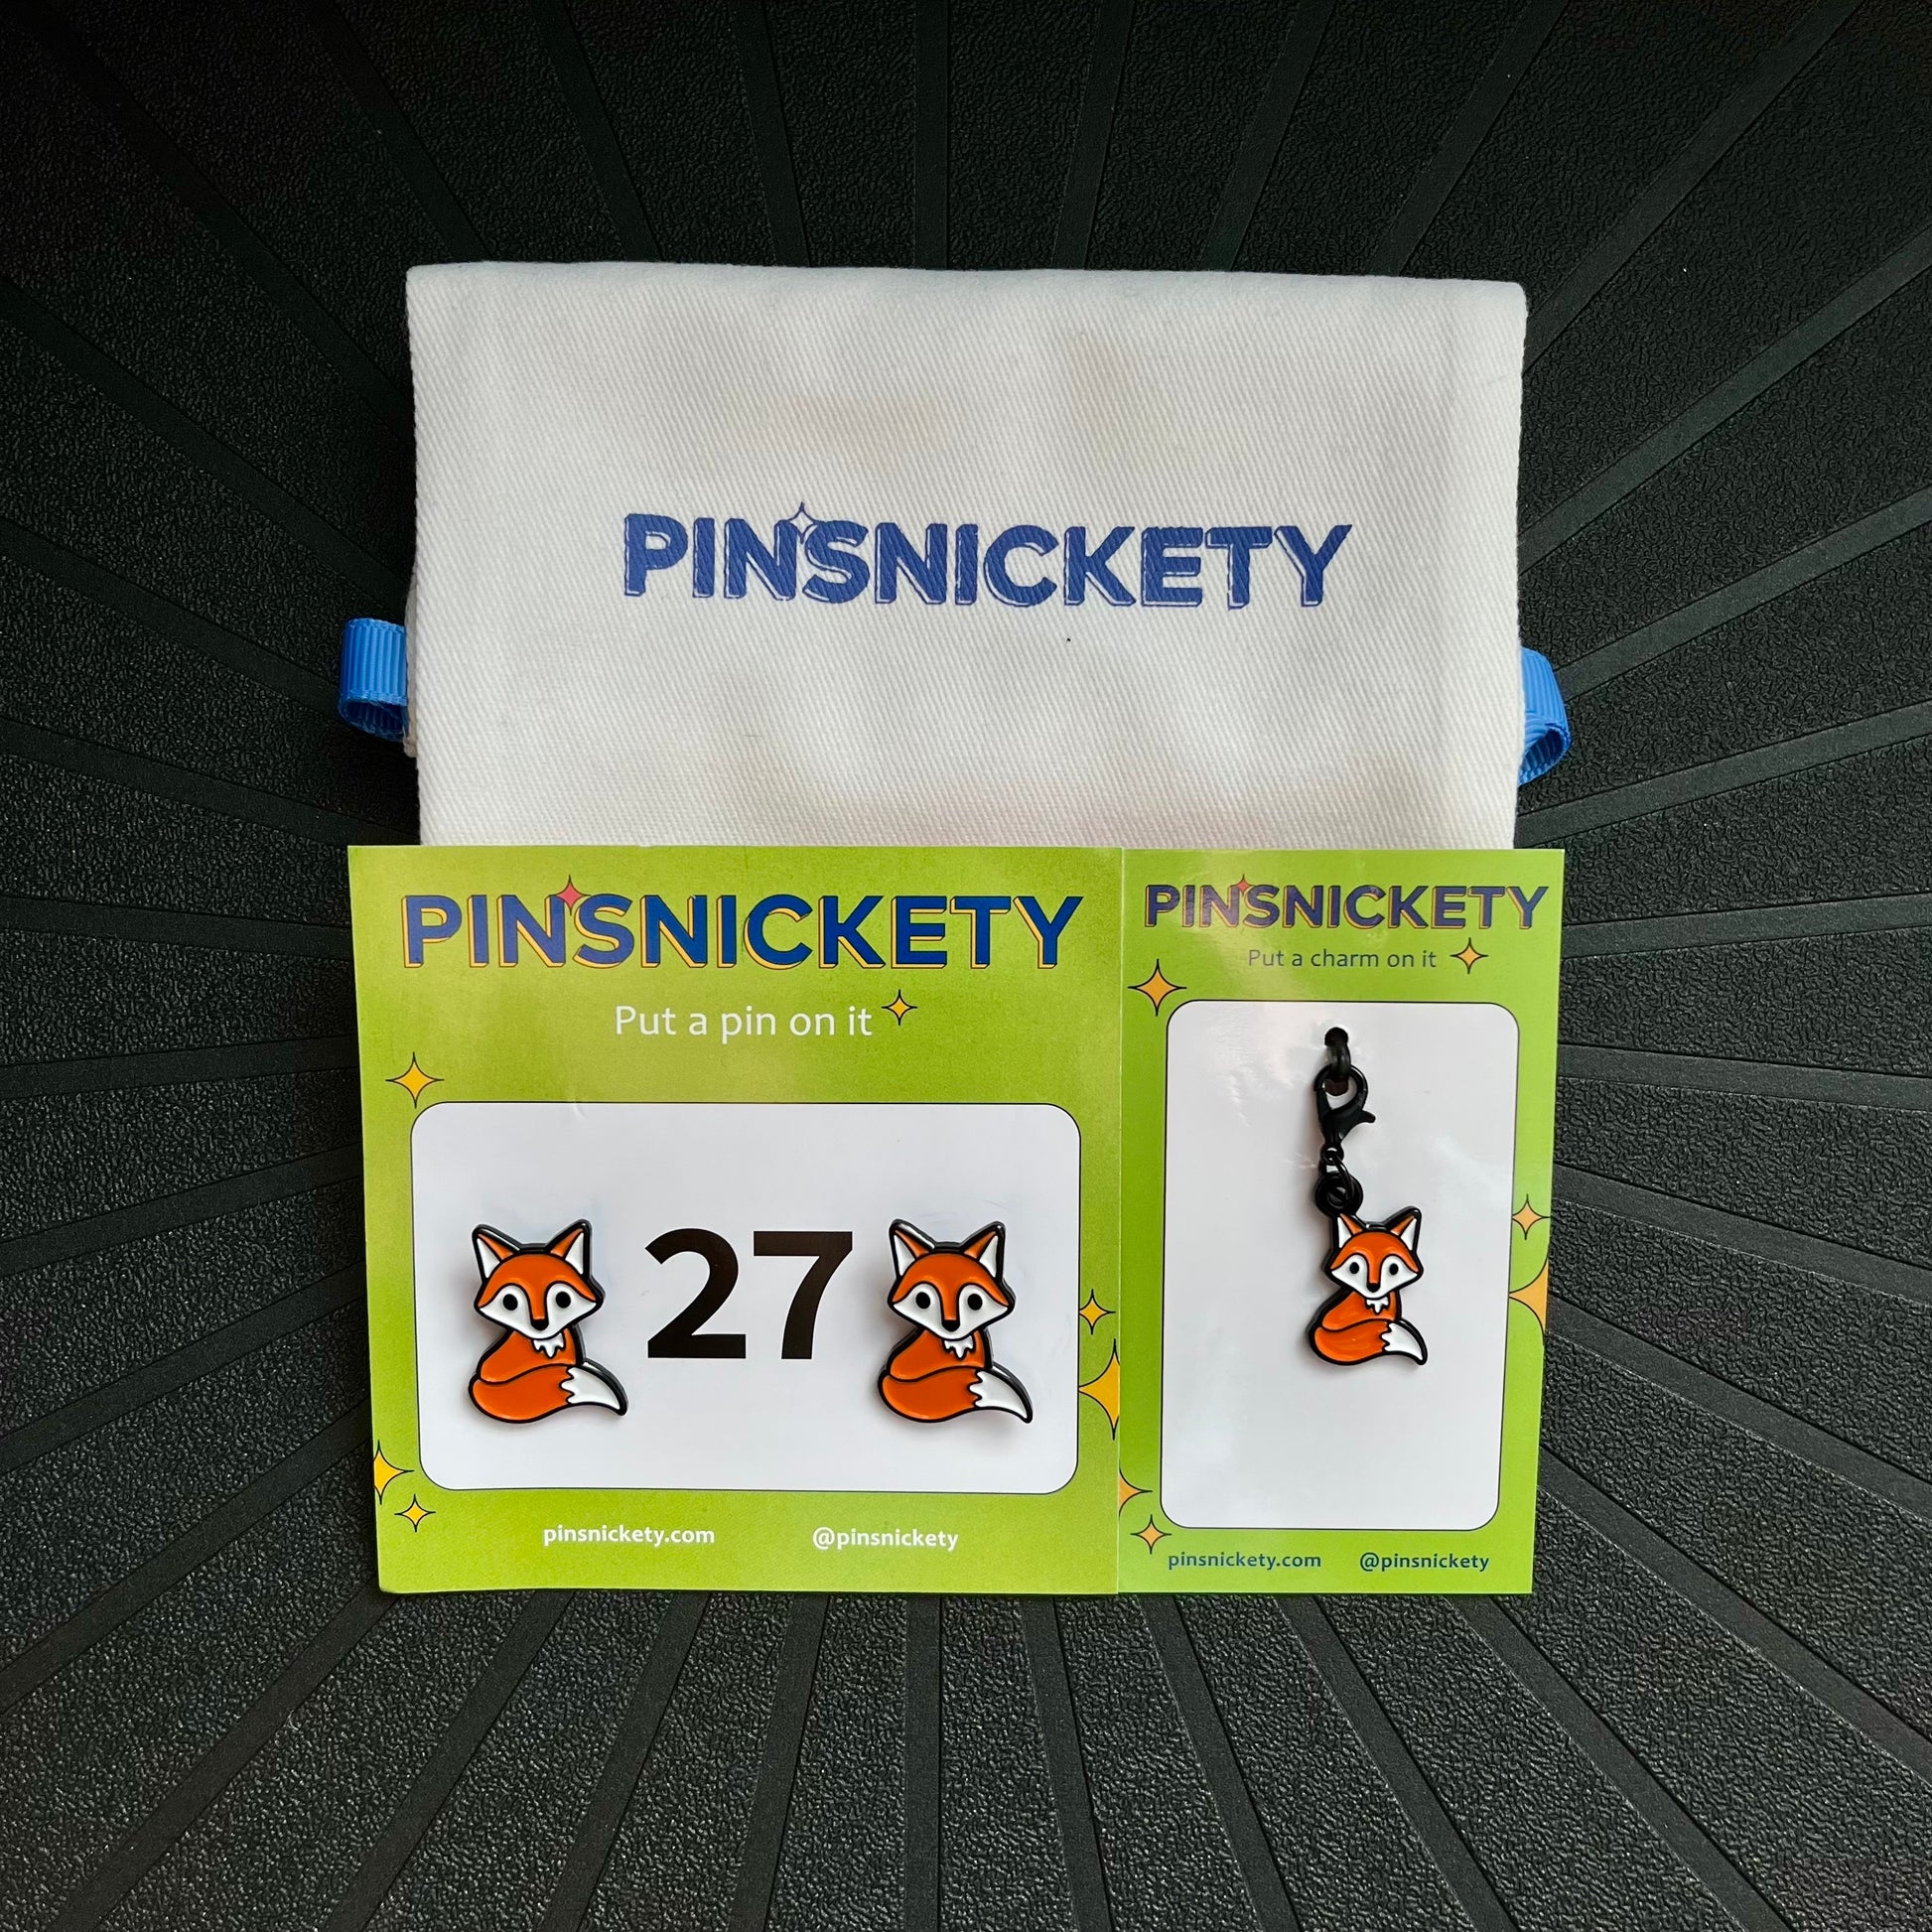 Pinsnickety fox horse show number pins and fox braid and bridle charm in a set with a pinsnickety twill storage bag